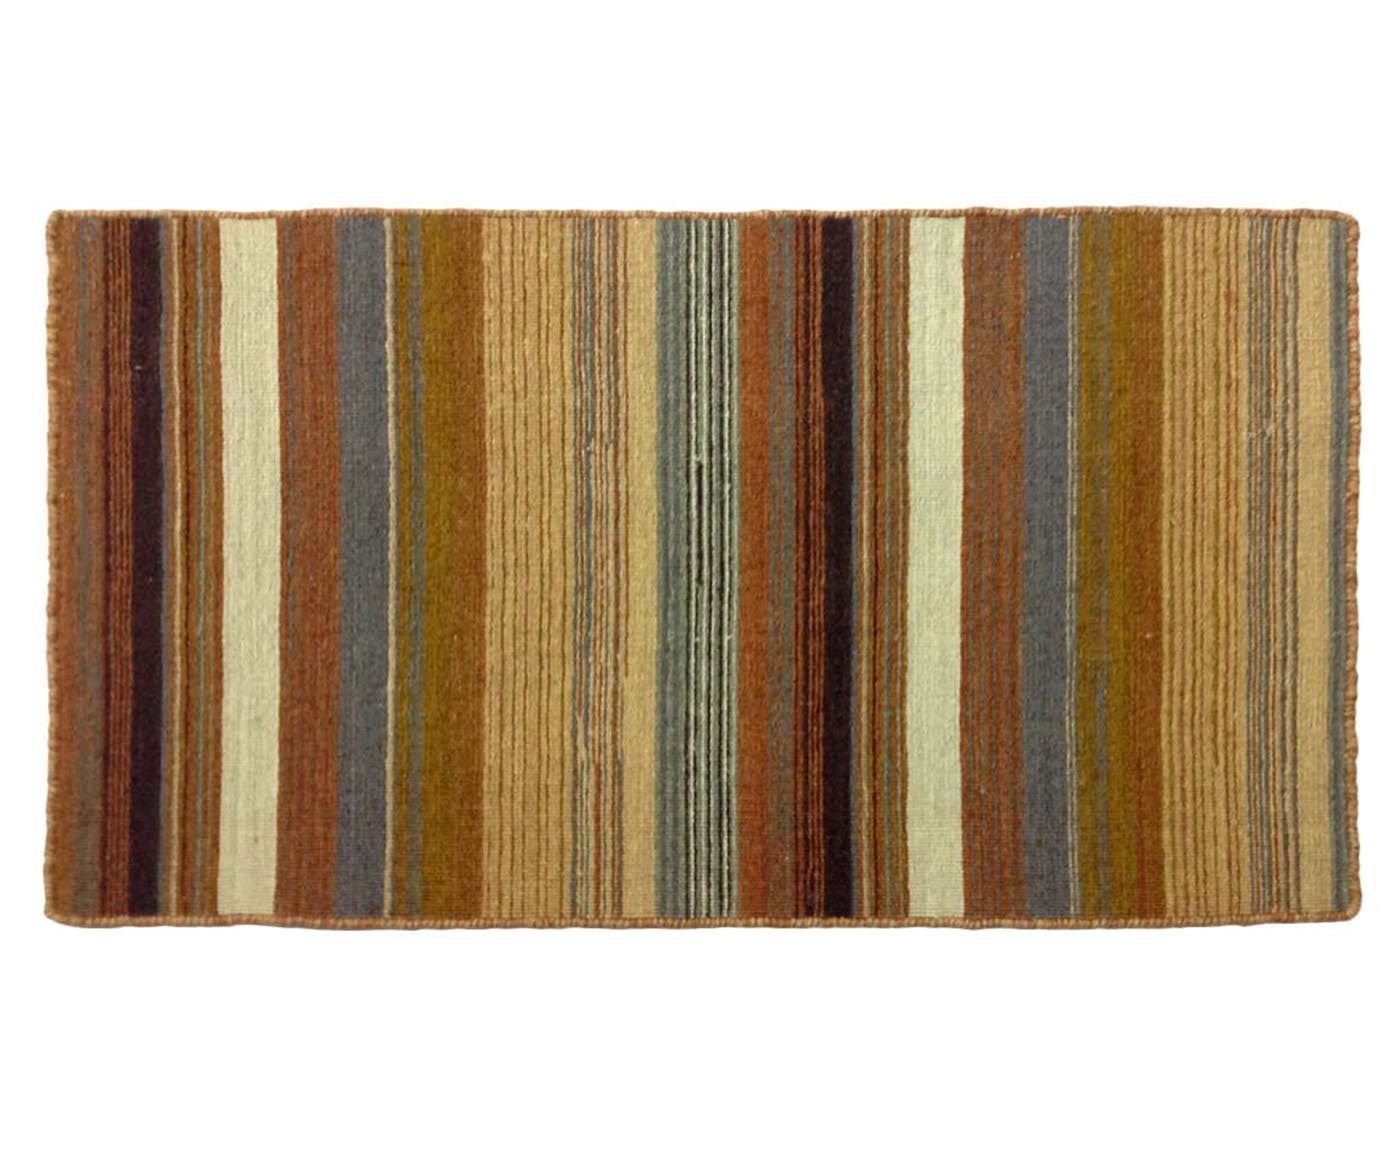 Tapete kilim indiano - 300x300cm | Westwing.com.br